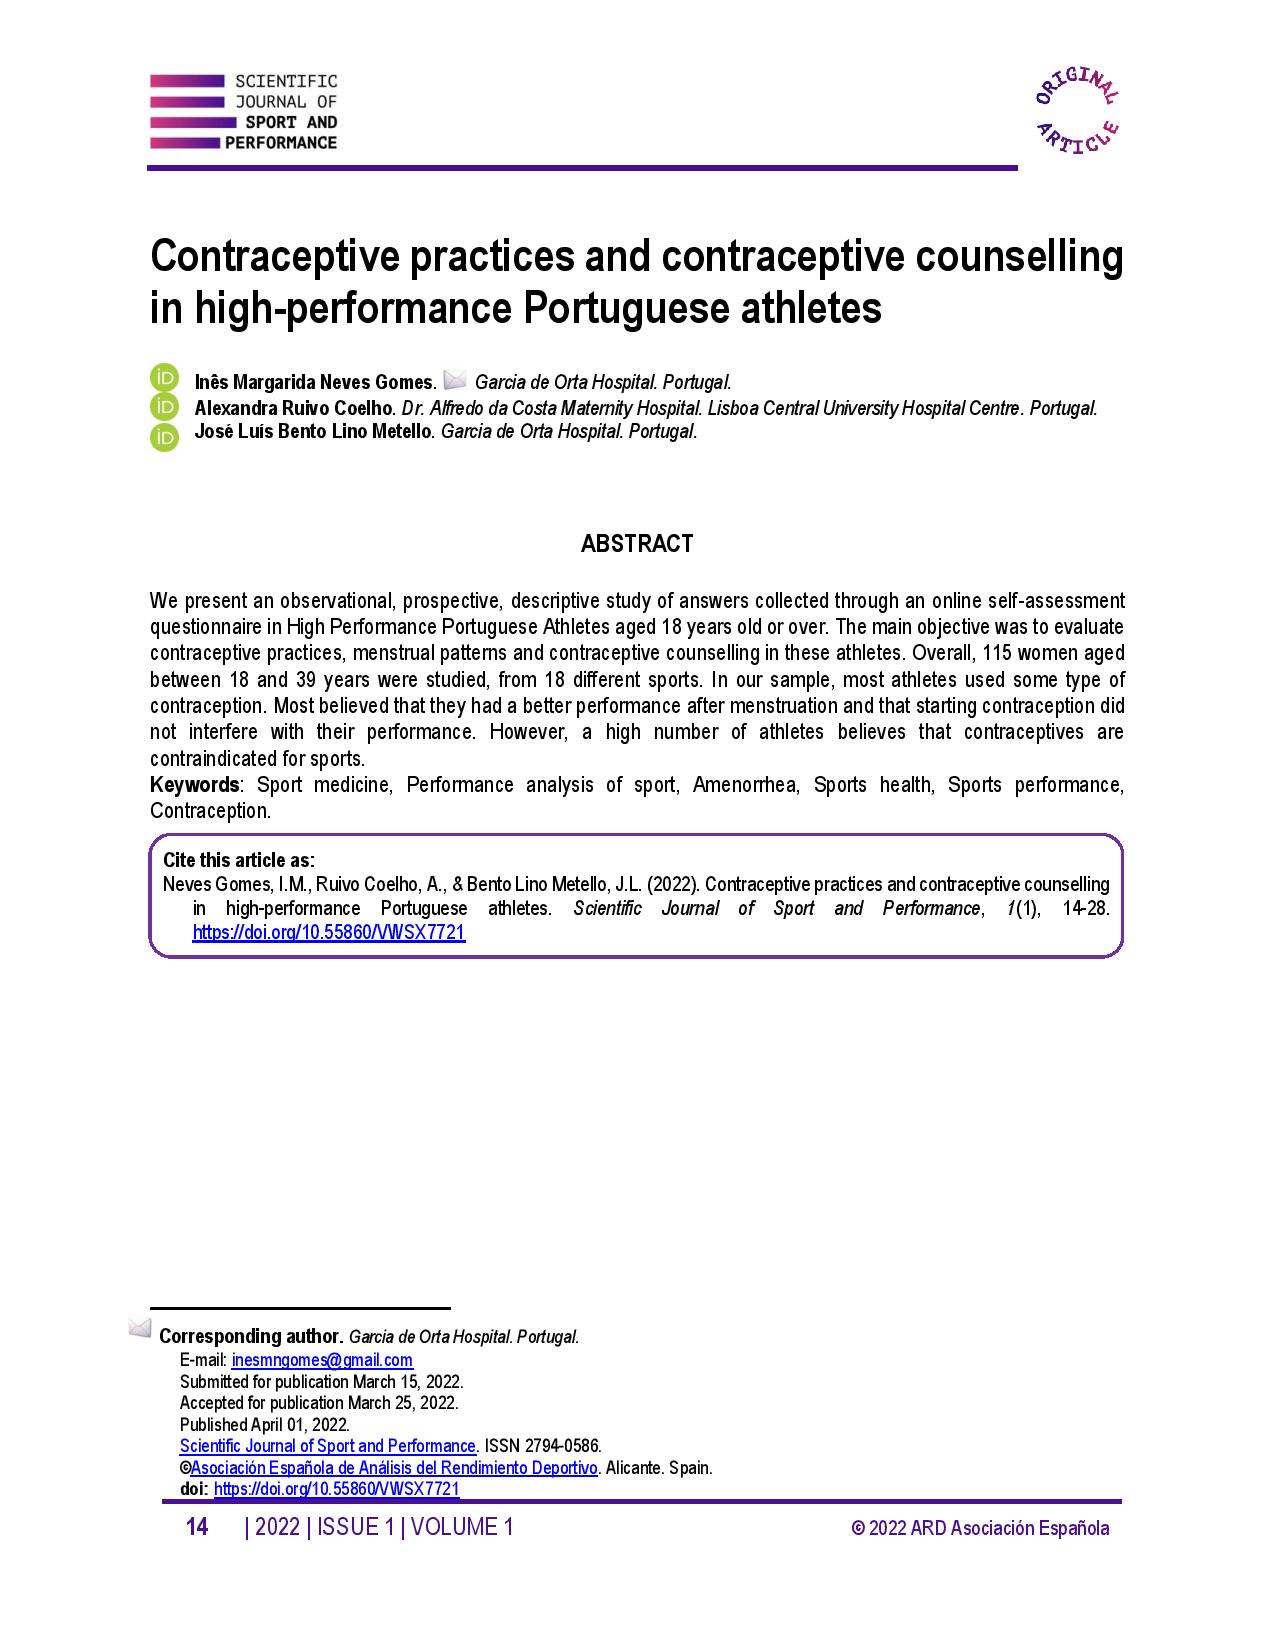 Contraceptive practices and contraceptive counselling in high-performance Portuguese athletes